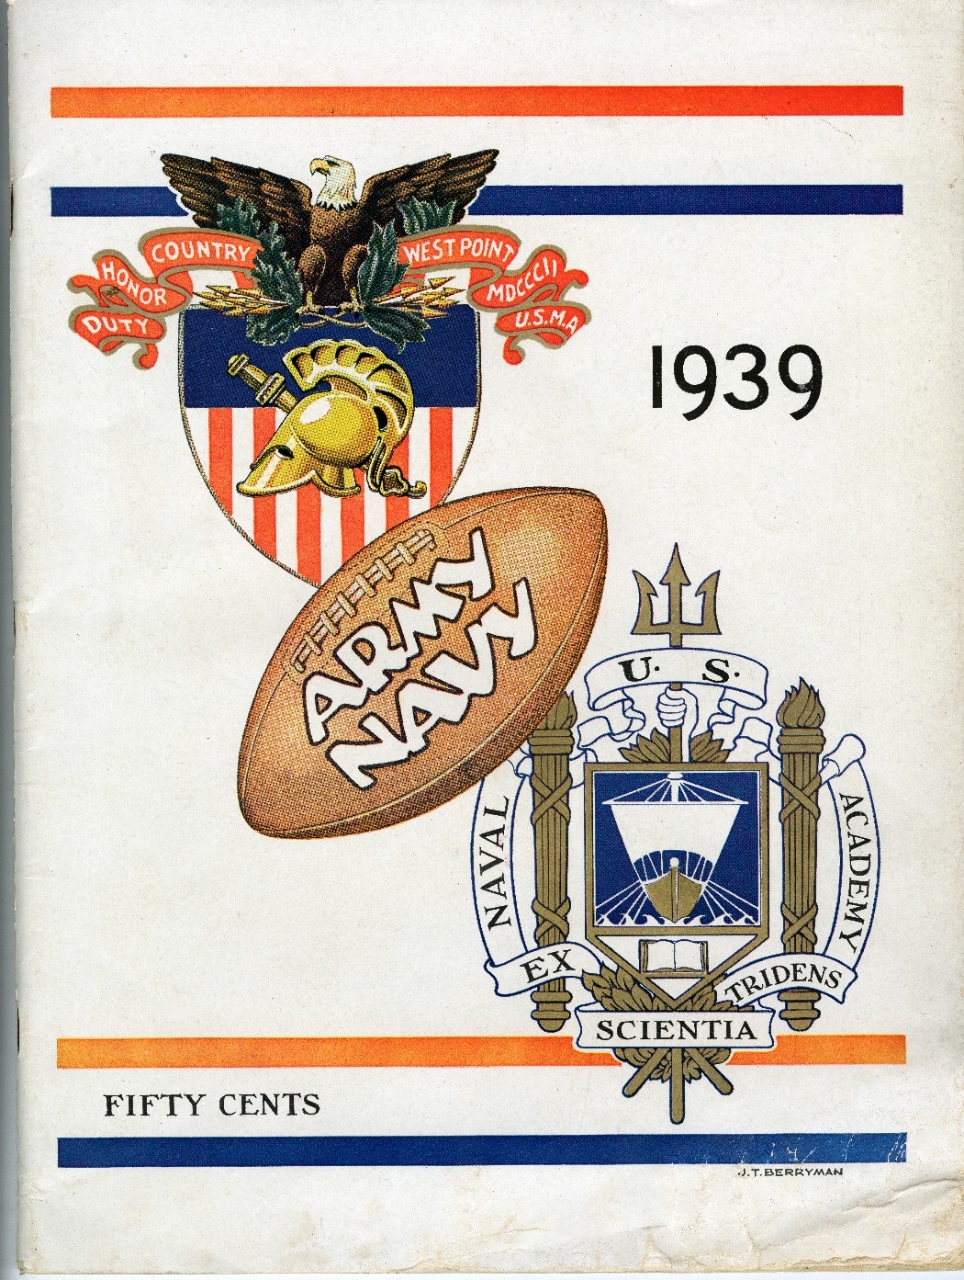 <p><span style="font-family: &quot;Arial&quot;,sans-serif; font-size: 10pt;">Cover of the Army-Navy football game program, dated December 2, 1939. Program has school seal from West Point in upper left corner and seal of Naval Academy in lower right corner. A tan colored football placed between the two seals reads &quot;Army/Navy&quot;.&nbsp;Lower left corner reads &quot;Fifty Cents&quot;. &nbsp;</span></p><div style="left: -10000px; top: 0px; width: 9000px; height: 16px; overflow: hidden; position: absolute;"><div>&nbsp;</div></div>